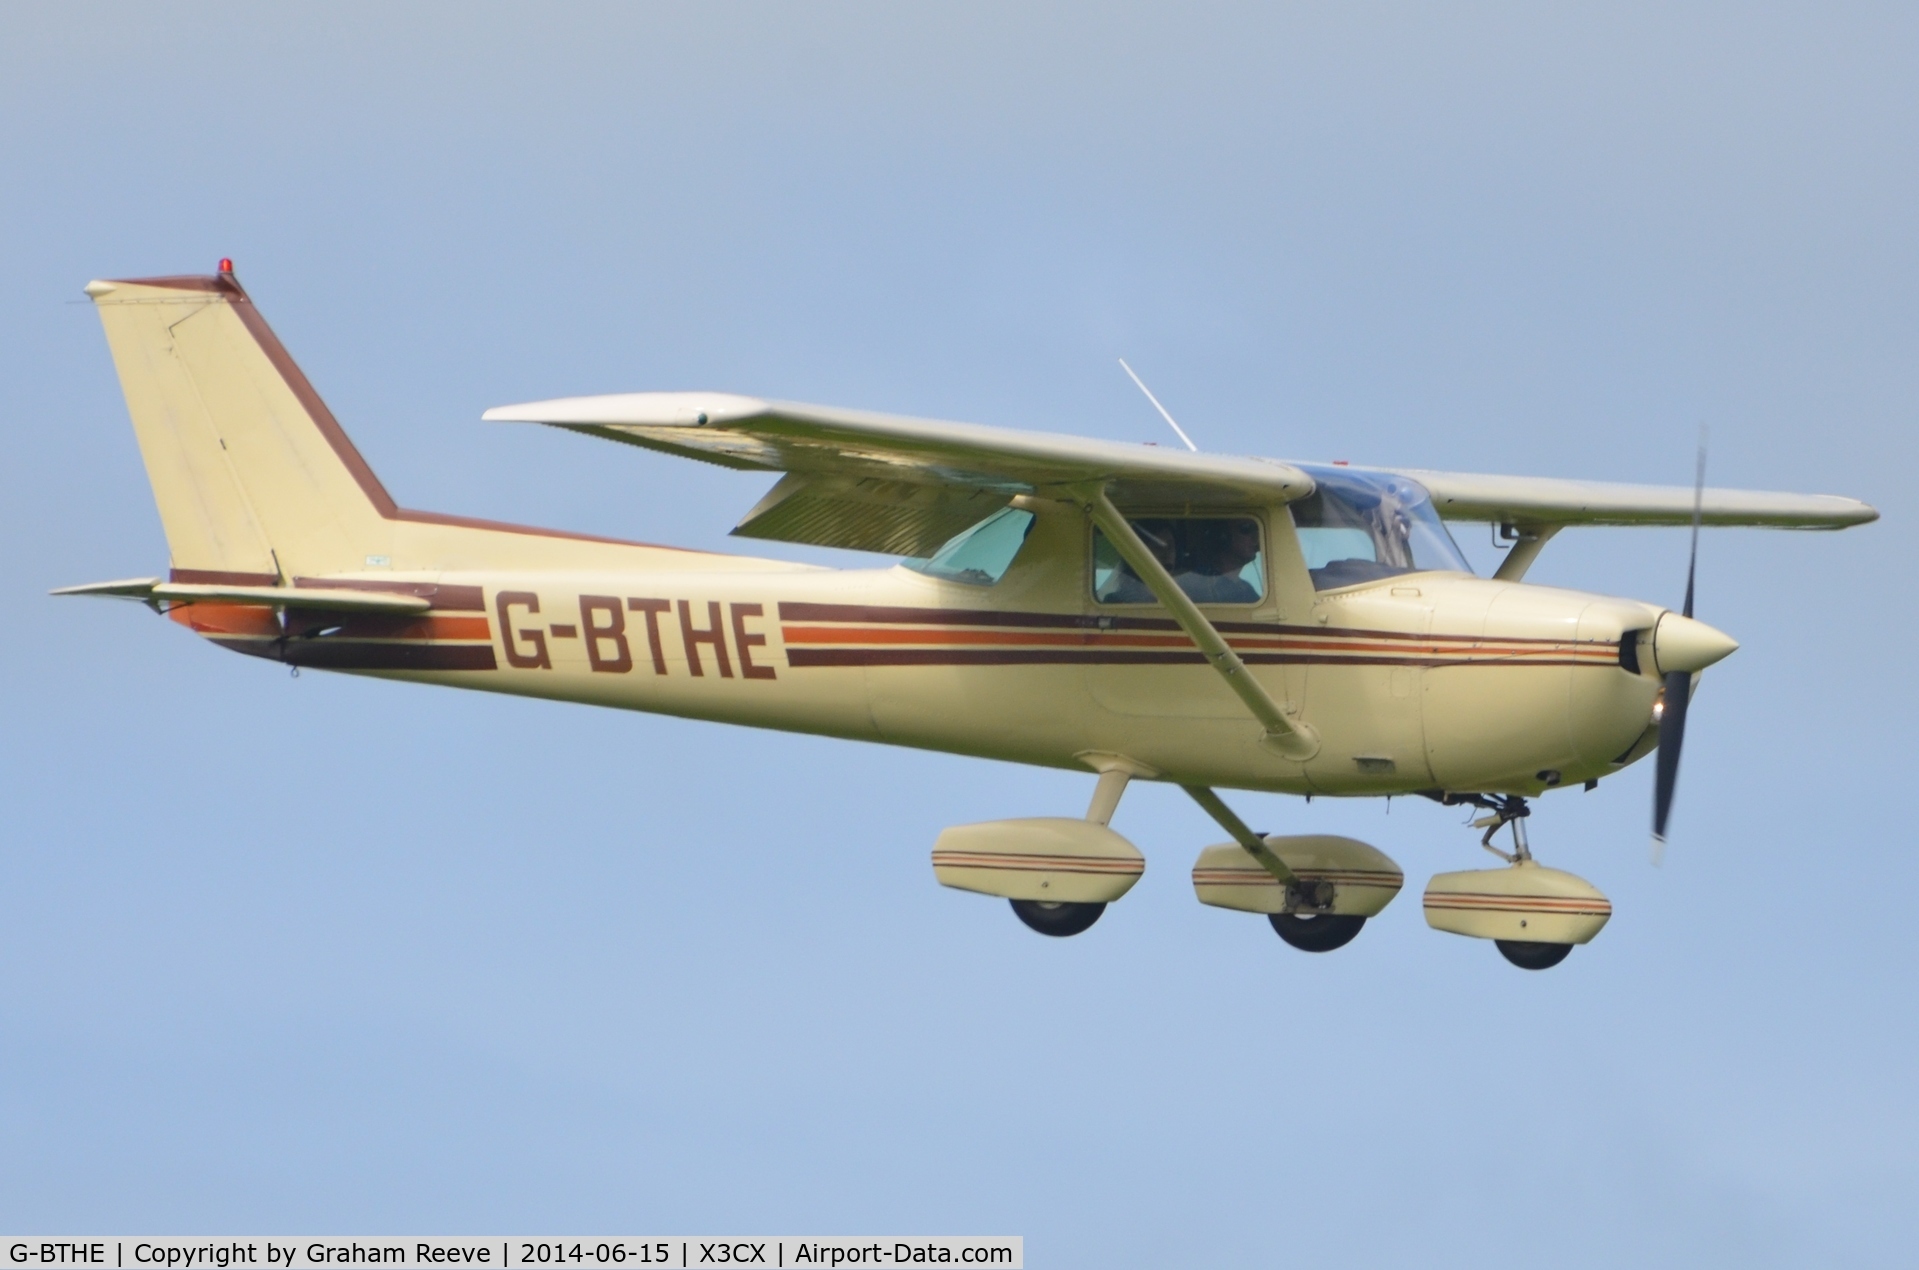 G-BTHE, 1974 Cessna 150L C/N 150-75340, About to land at Northrepps.